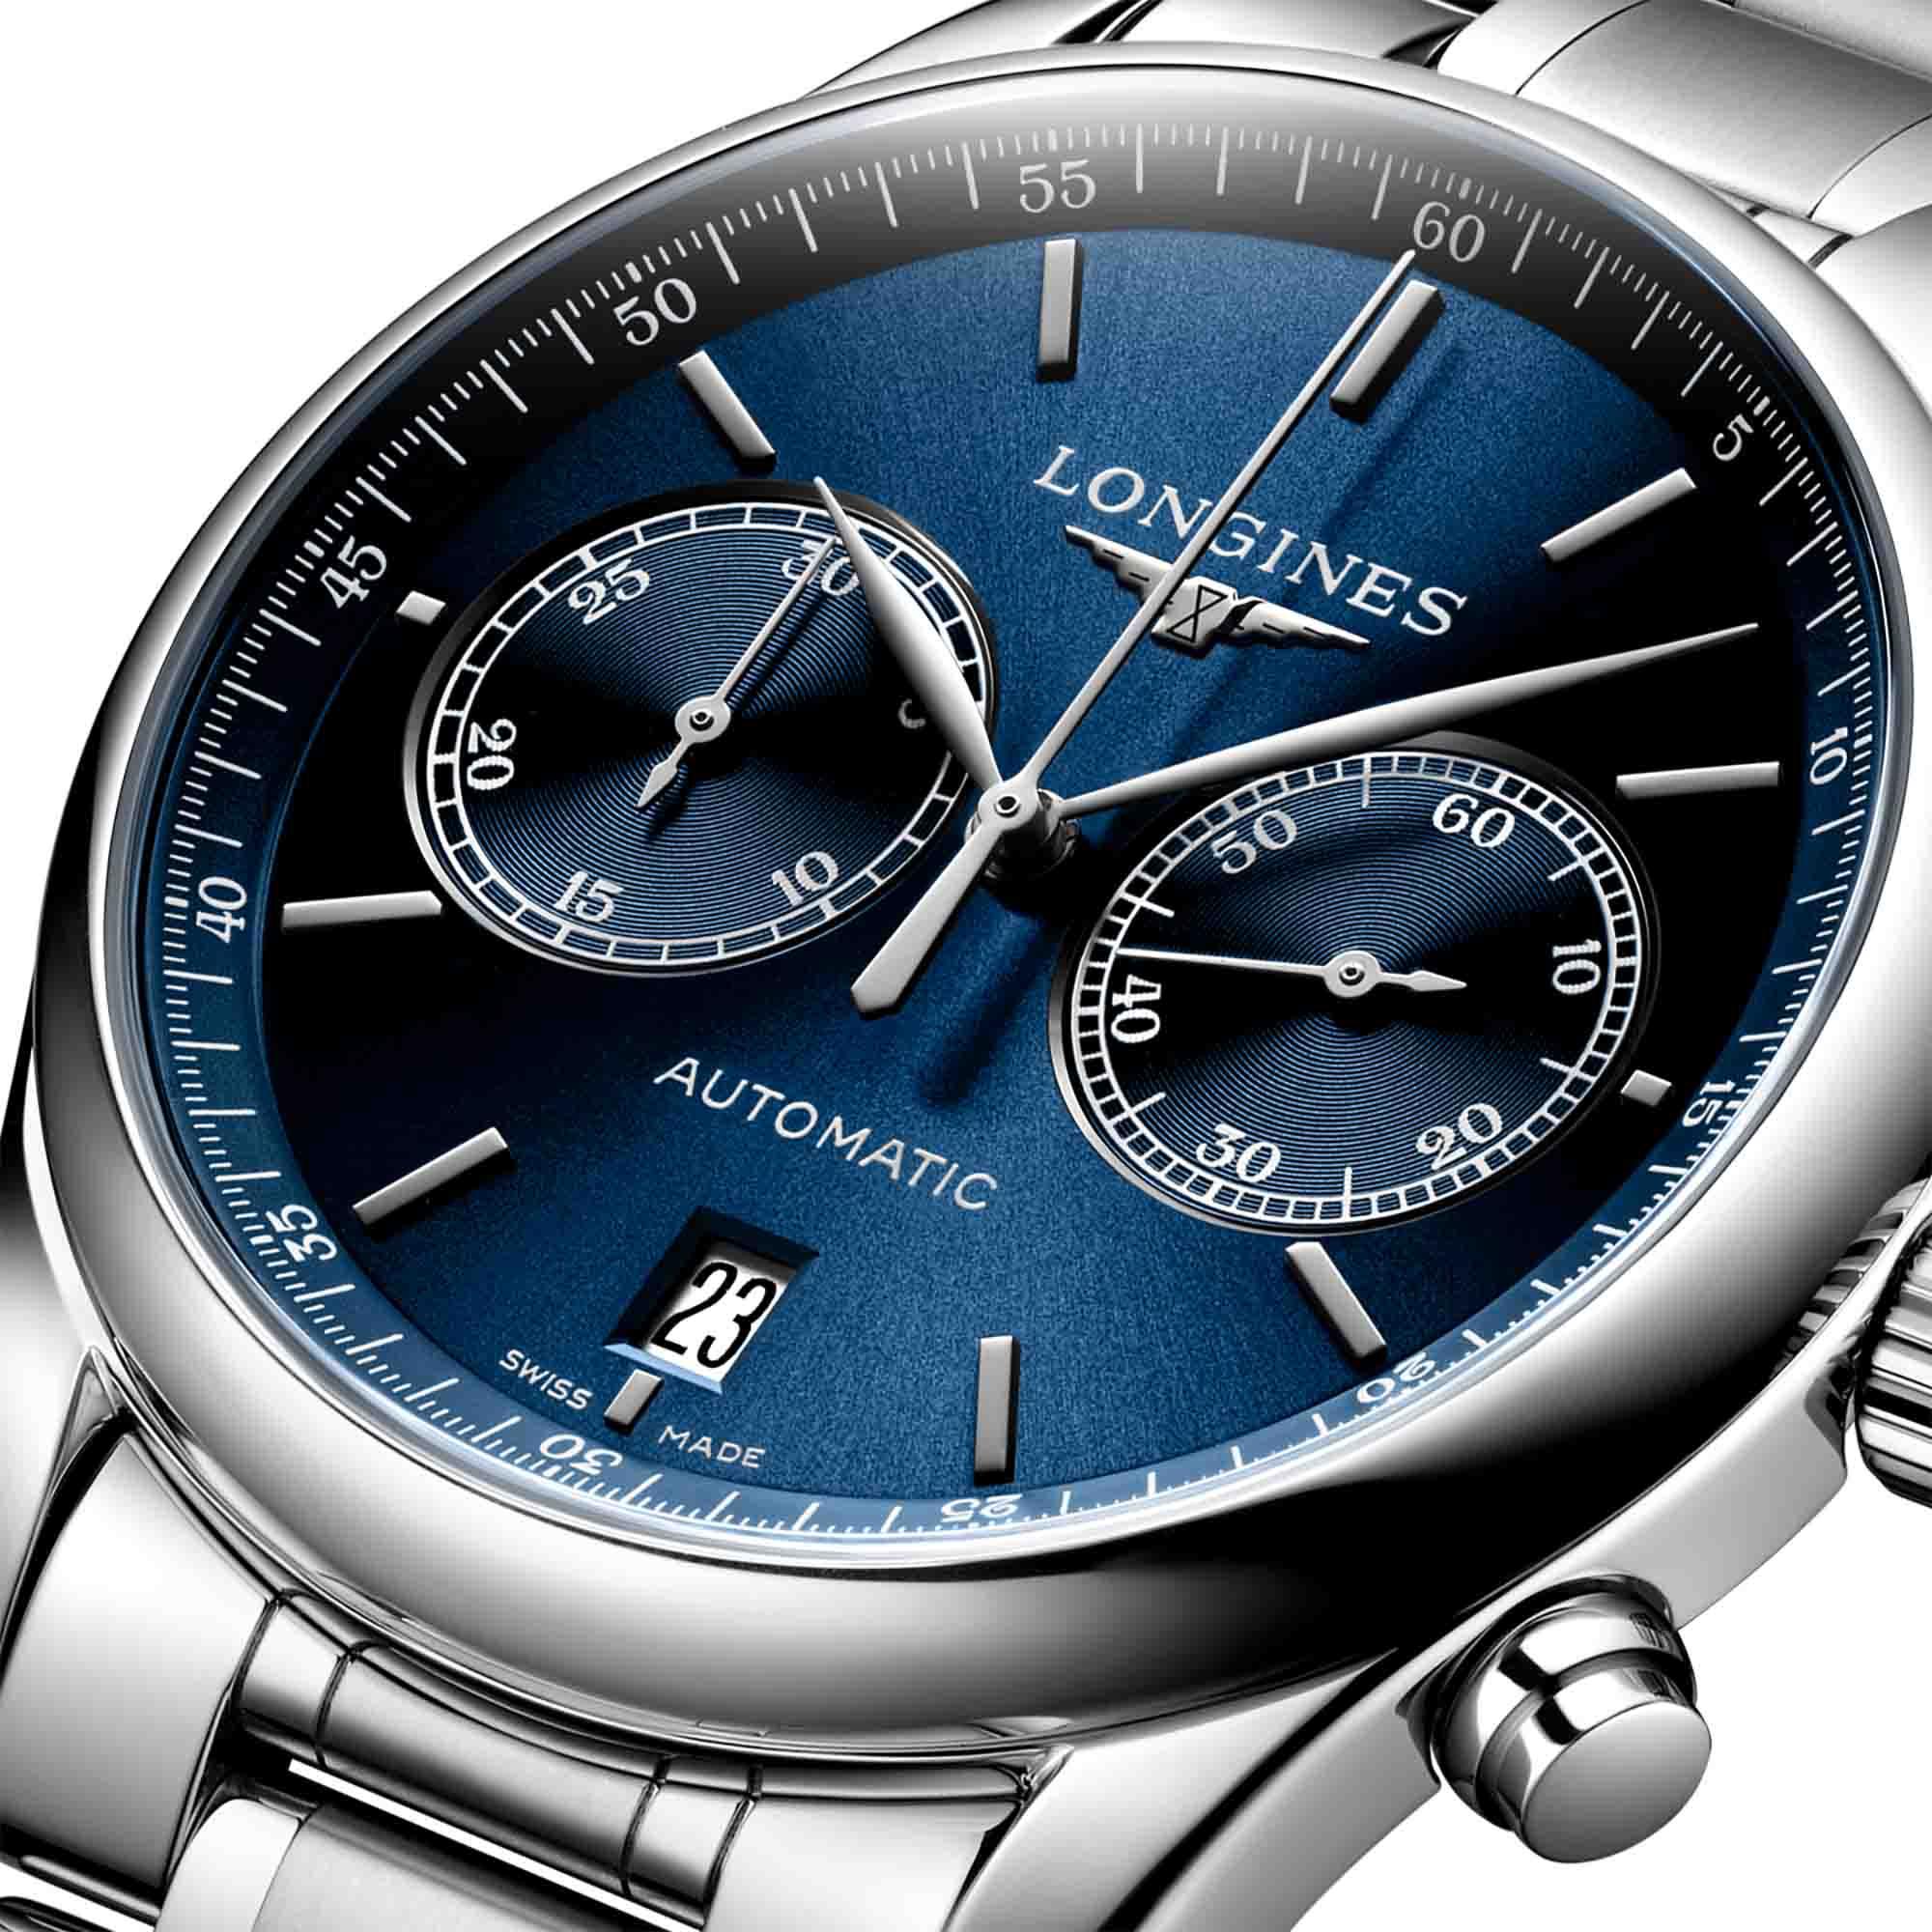 Longines The Longines Master Collection (Ref: L2.629.4.92.6)